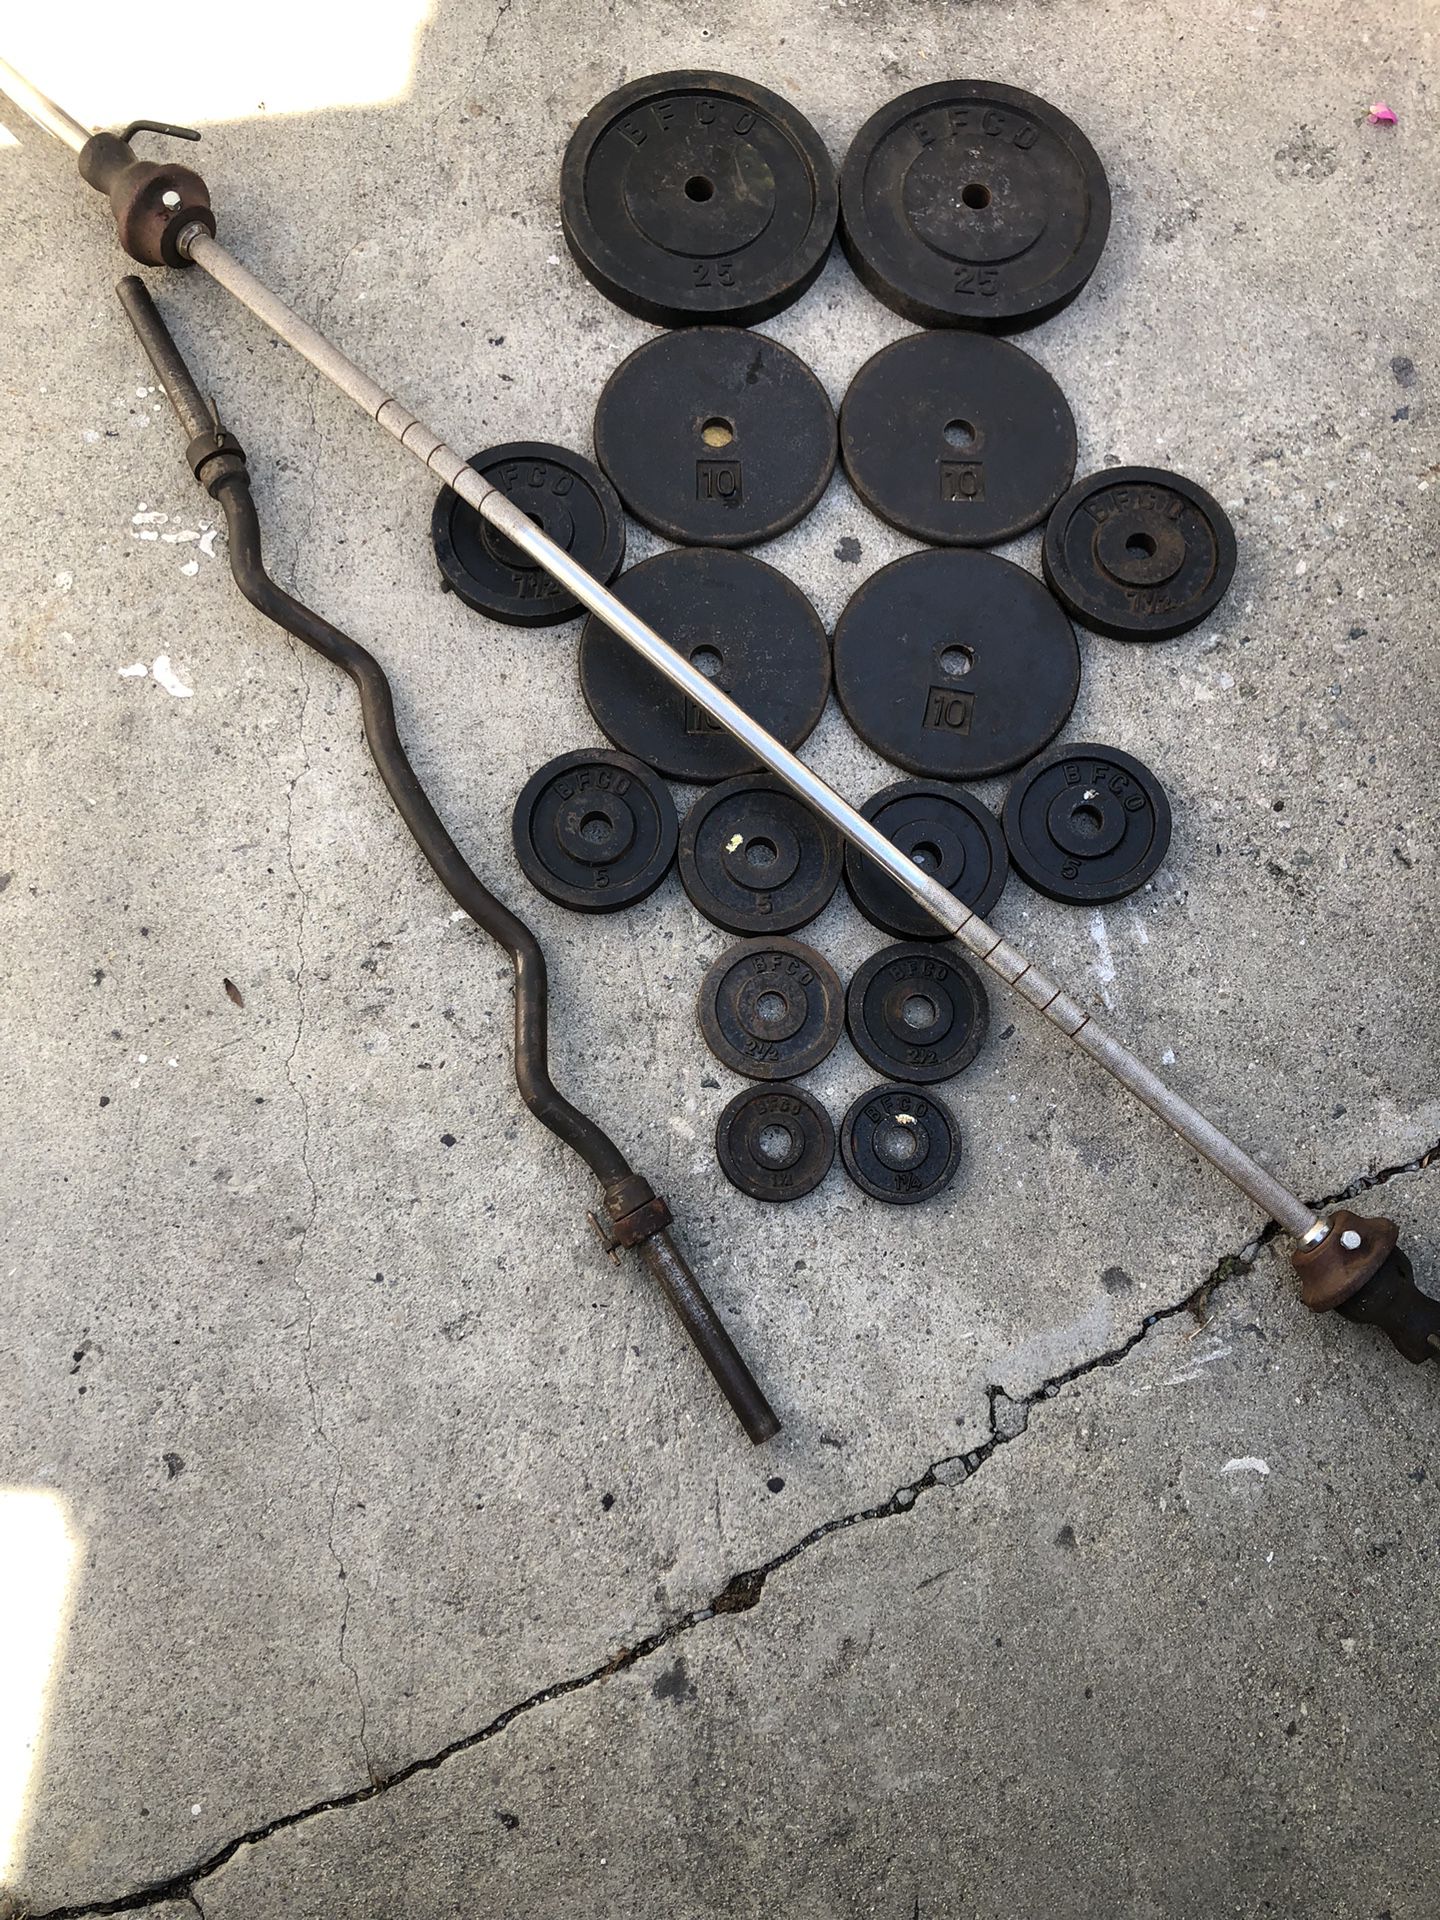 Standard Weights With Straight Bar and Curl Bar. Selling all together for $120 firm